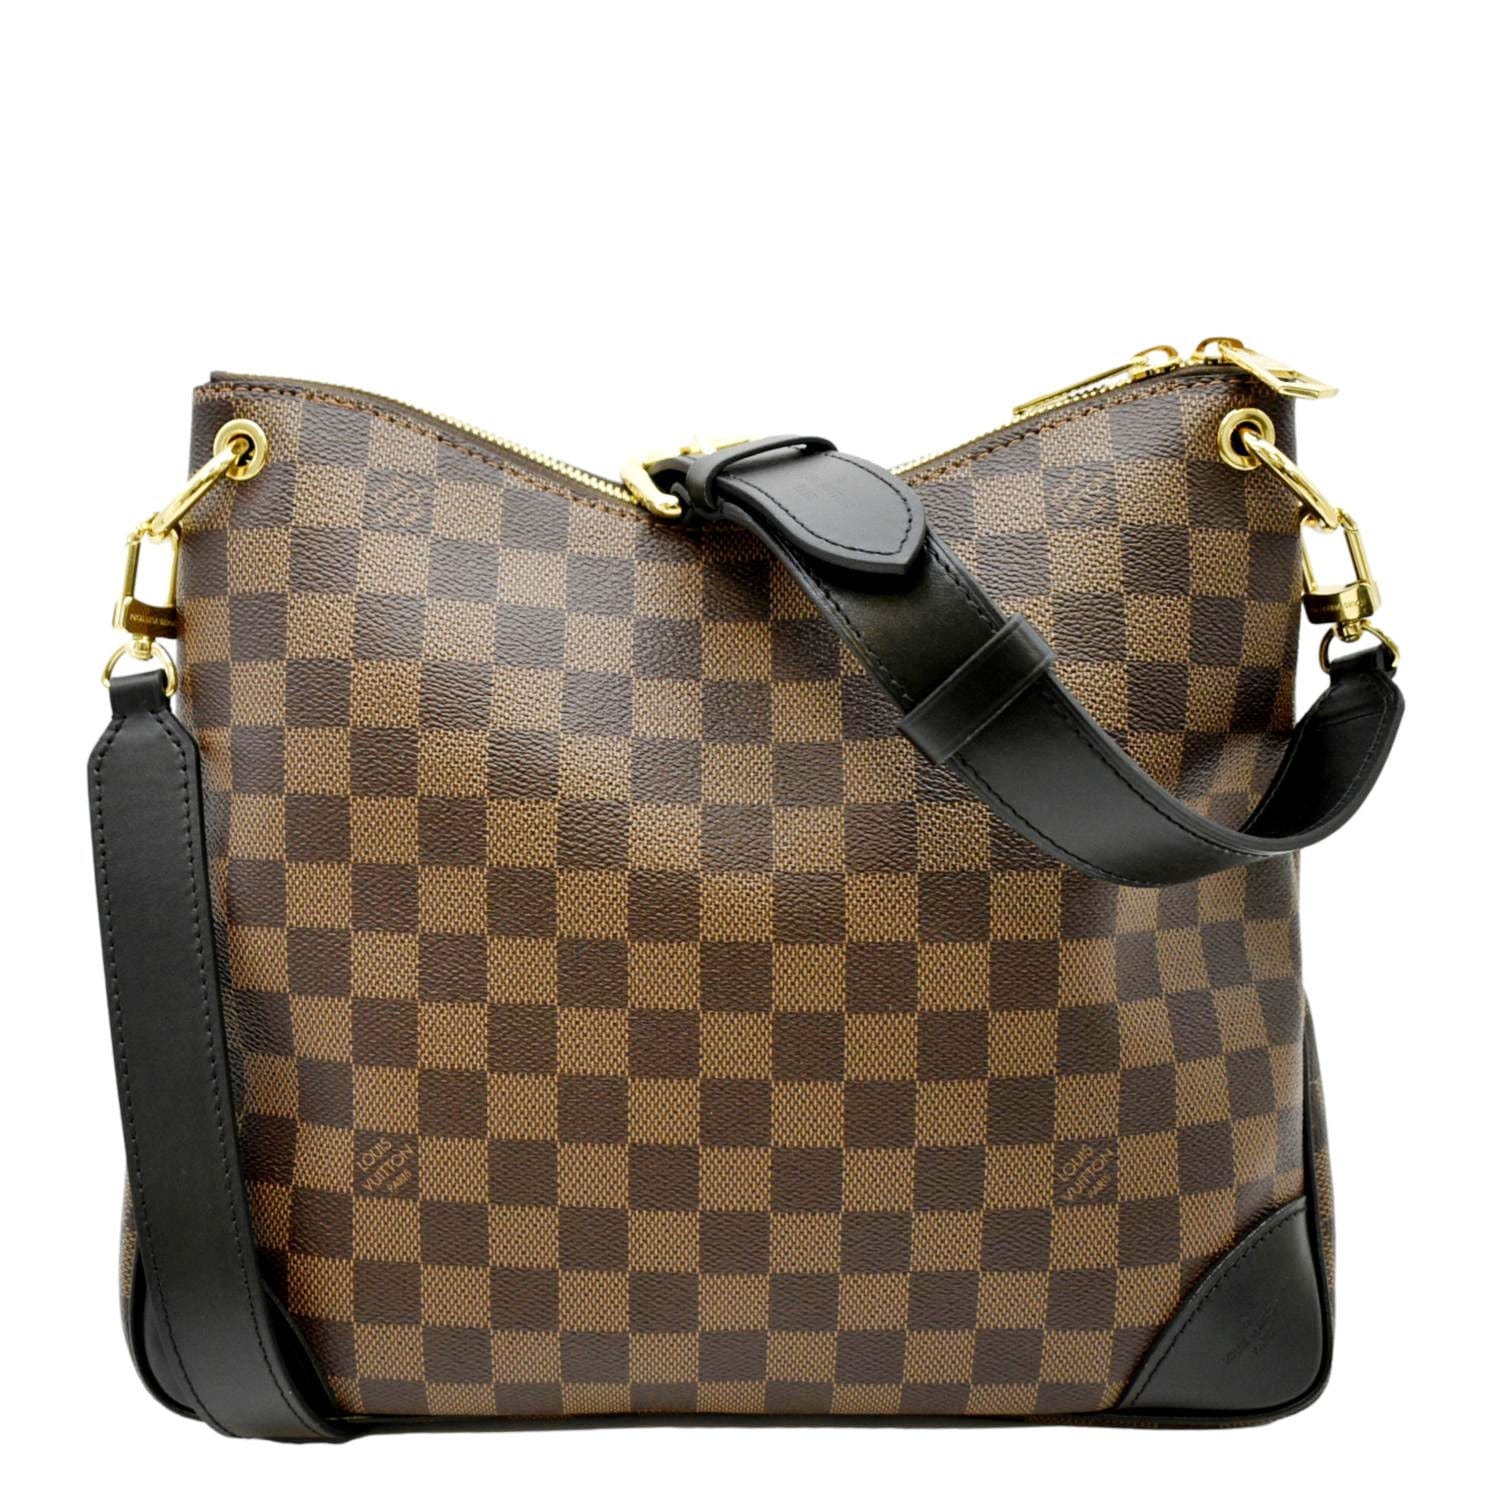 LOUIS VUITTON Damier Odeon Tote bag MM N45283 BRAND NEW! GORGEOUS! SOLD OUT  ❤️